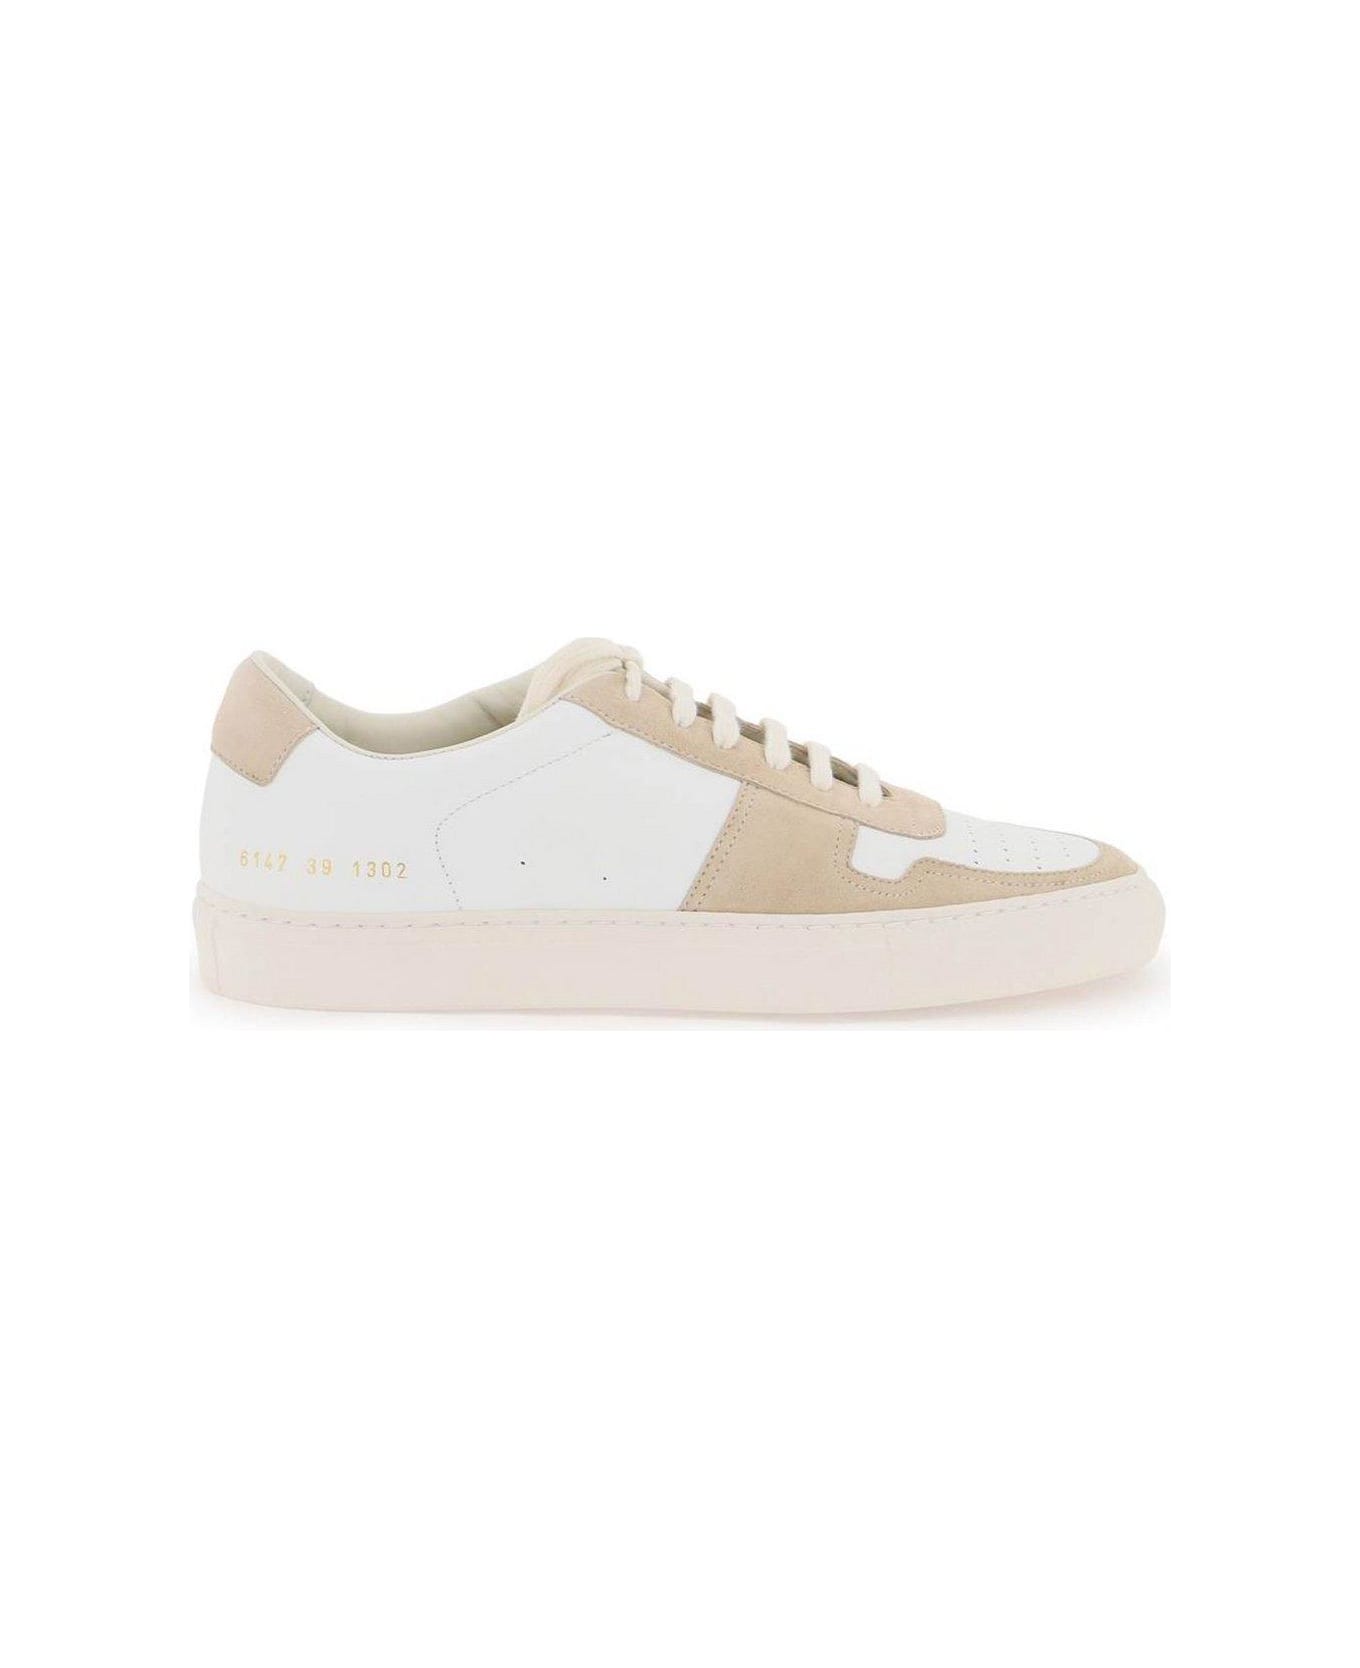 Common Projects Bball Low-top Sneakers - TAN (Beige)